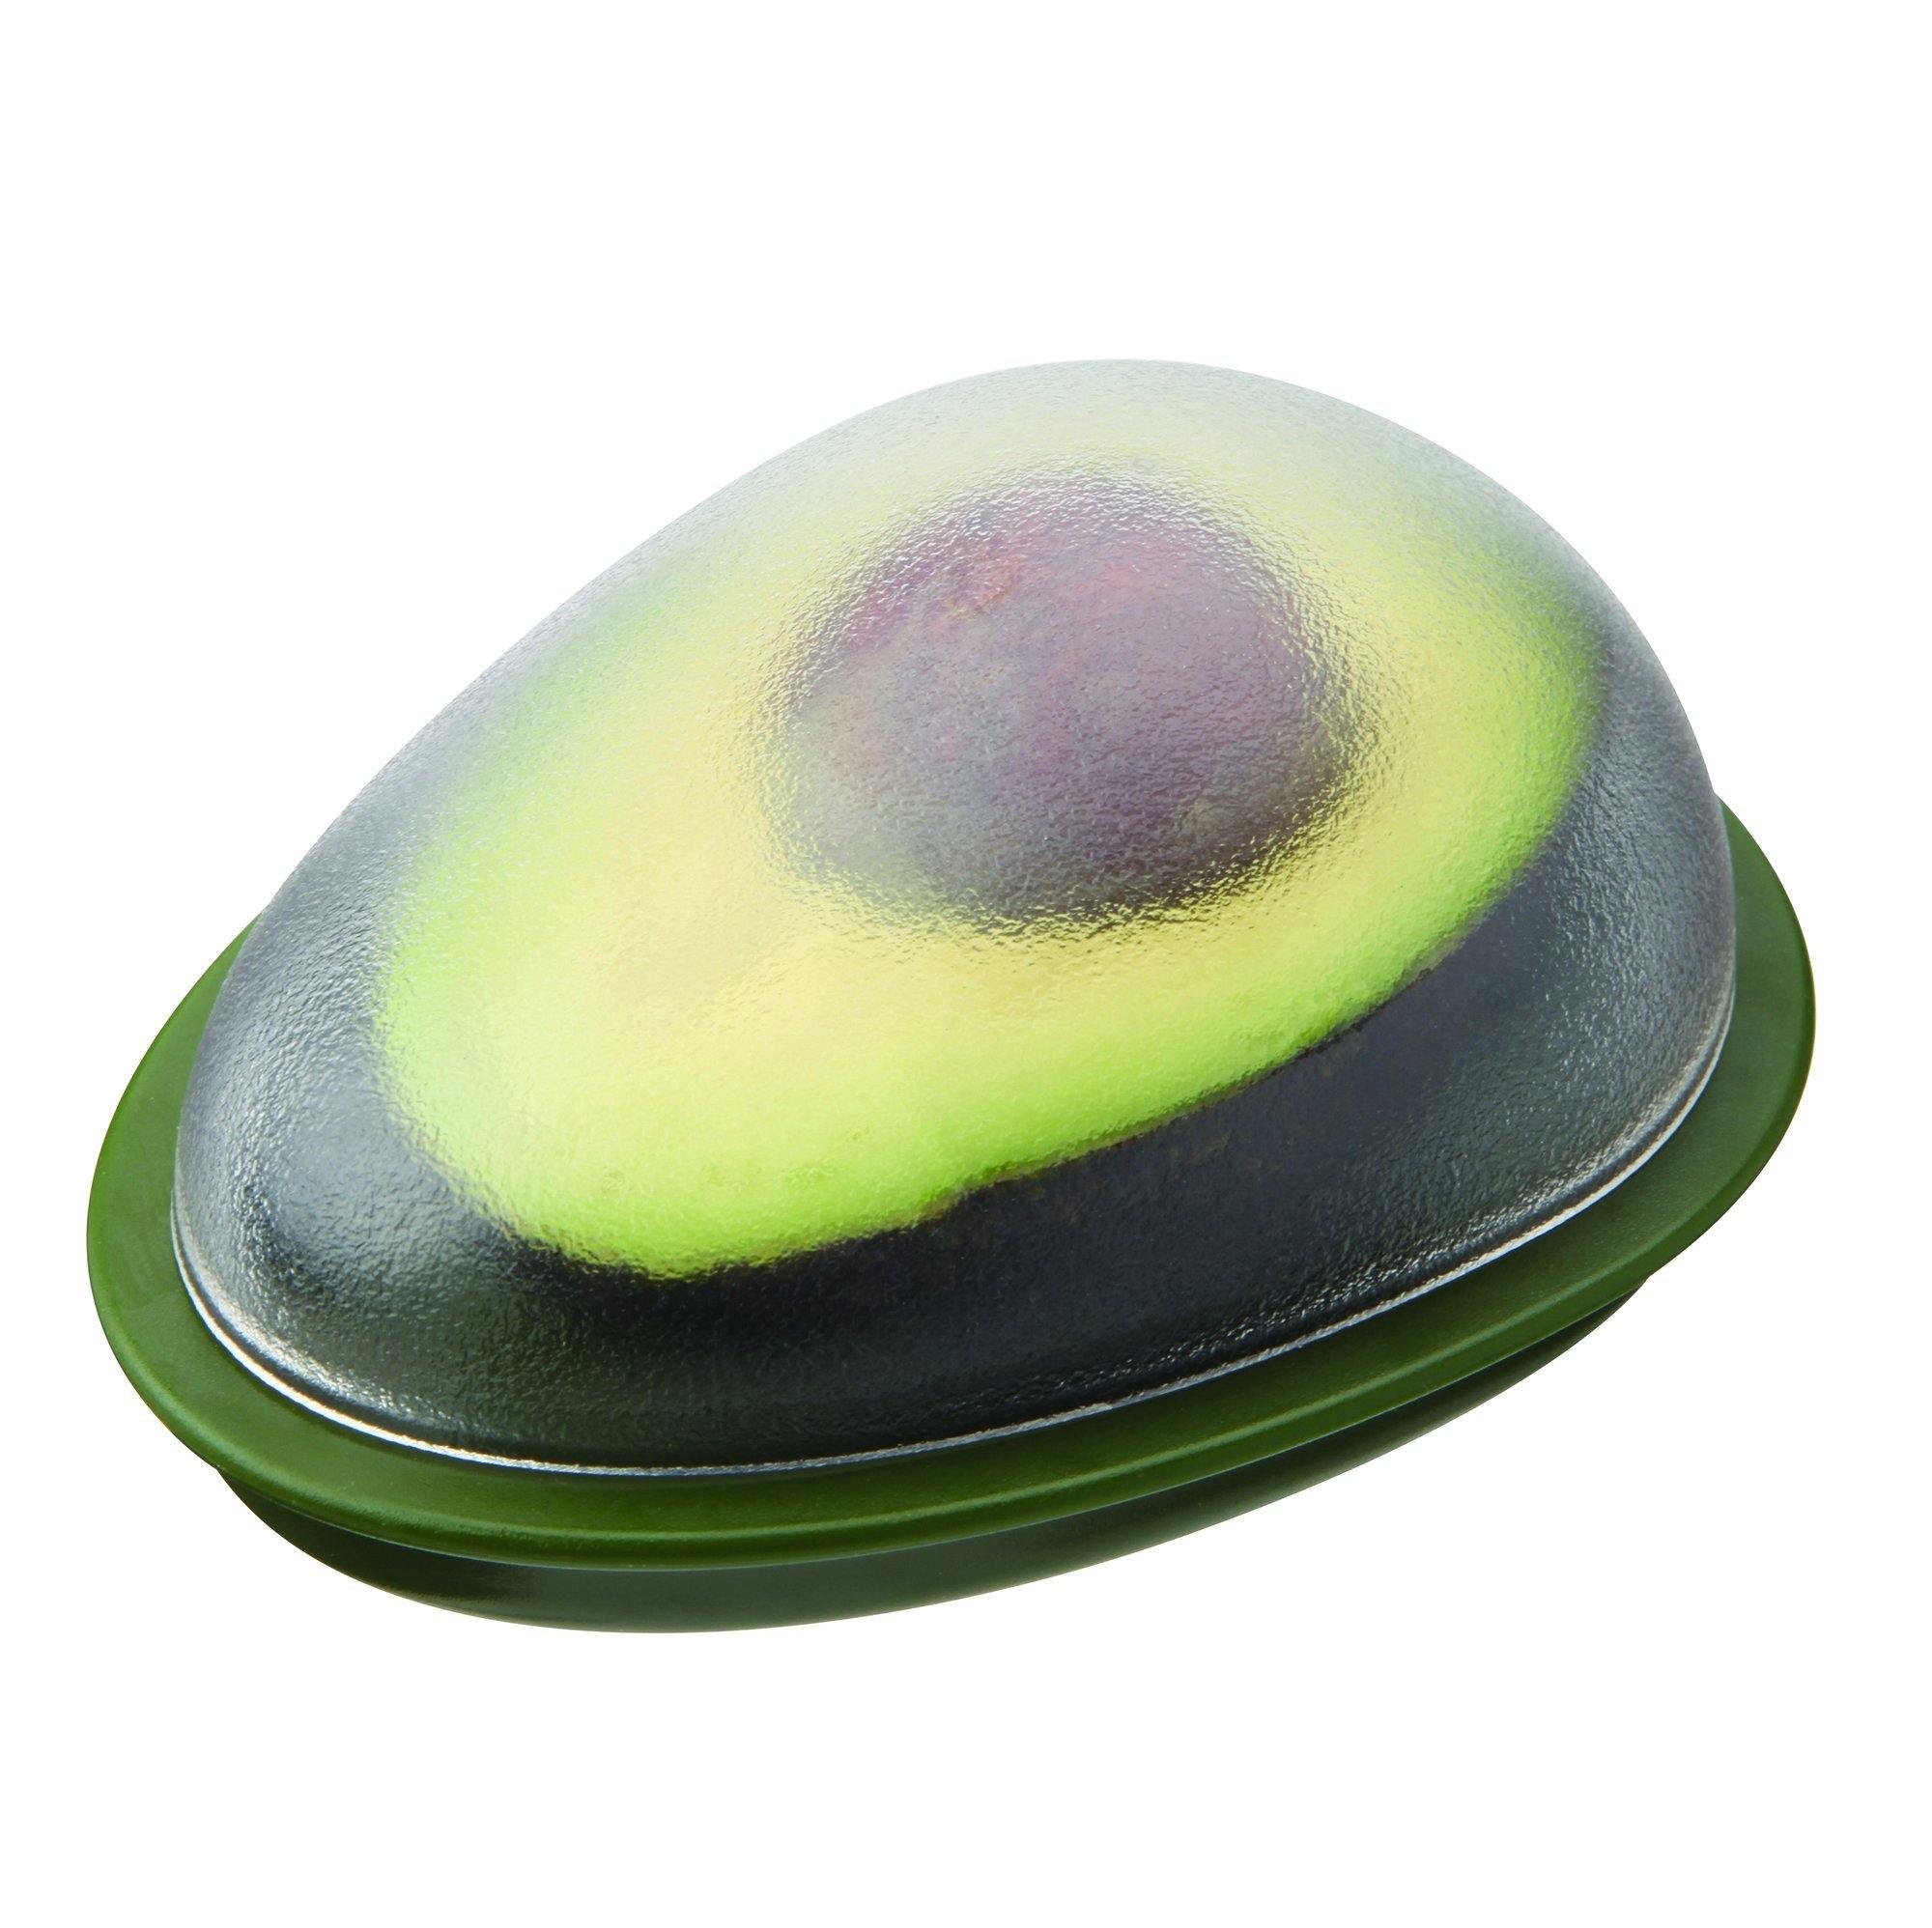 Joie MSC Avocado Container - Dollar Max Depot